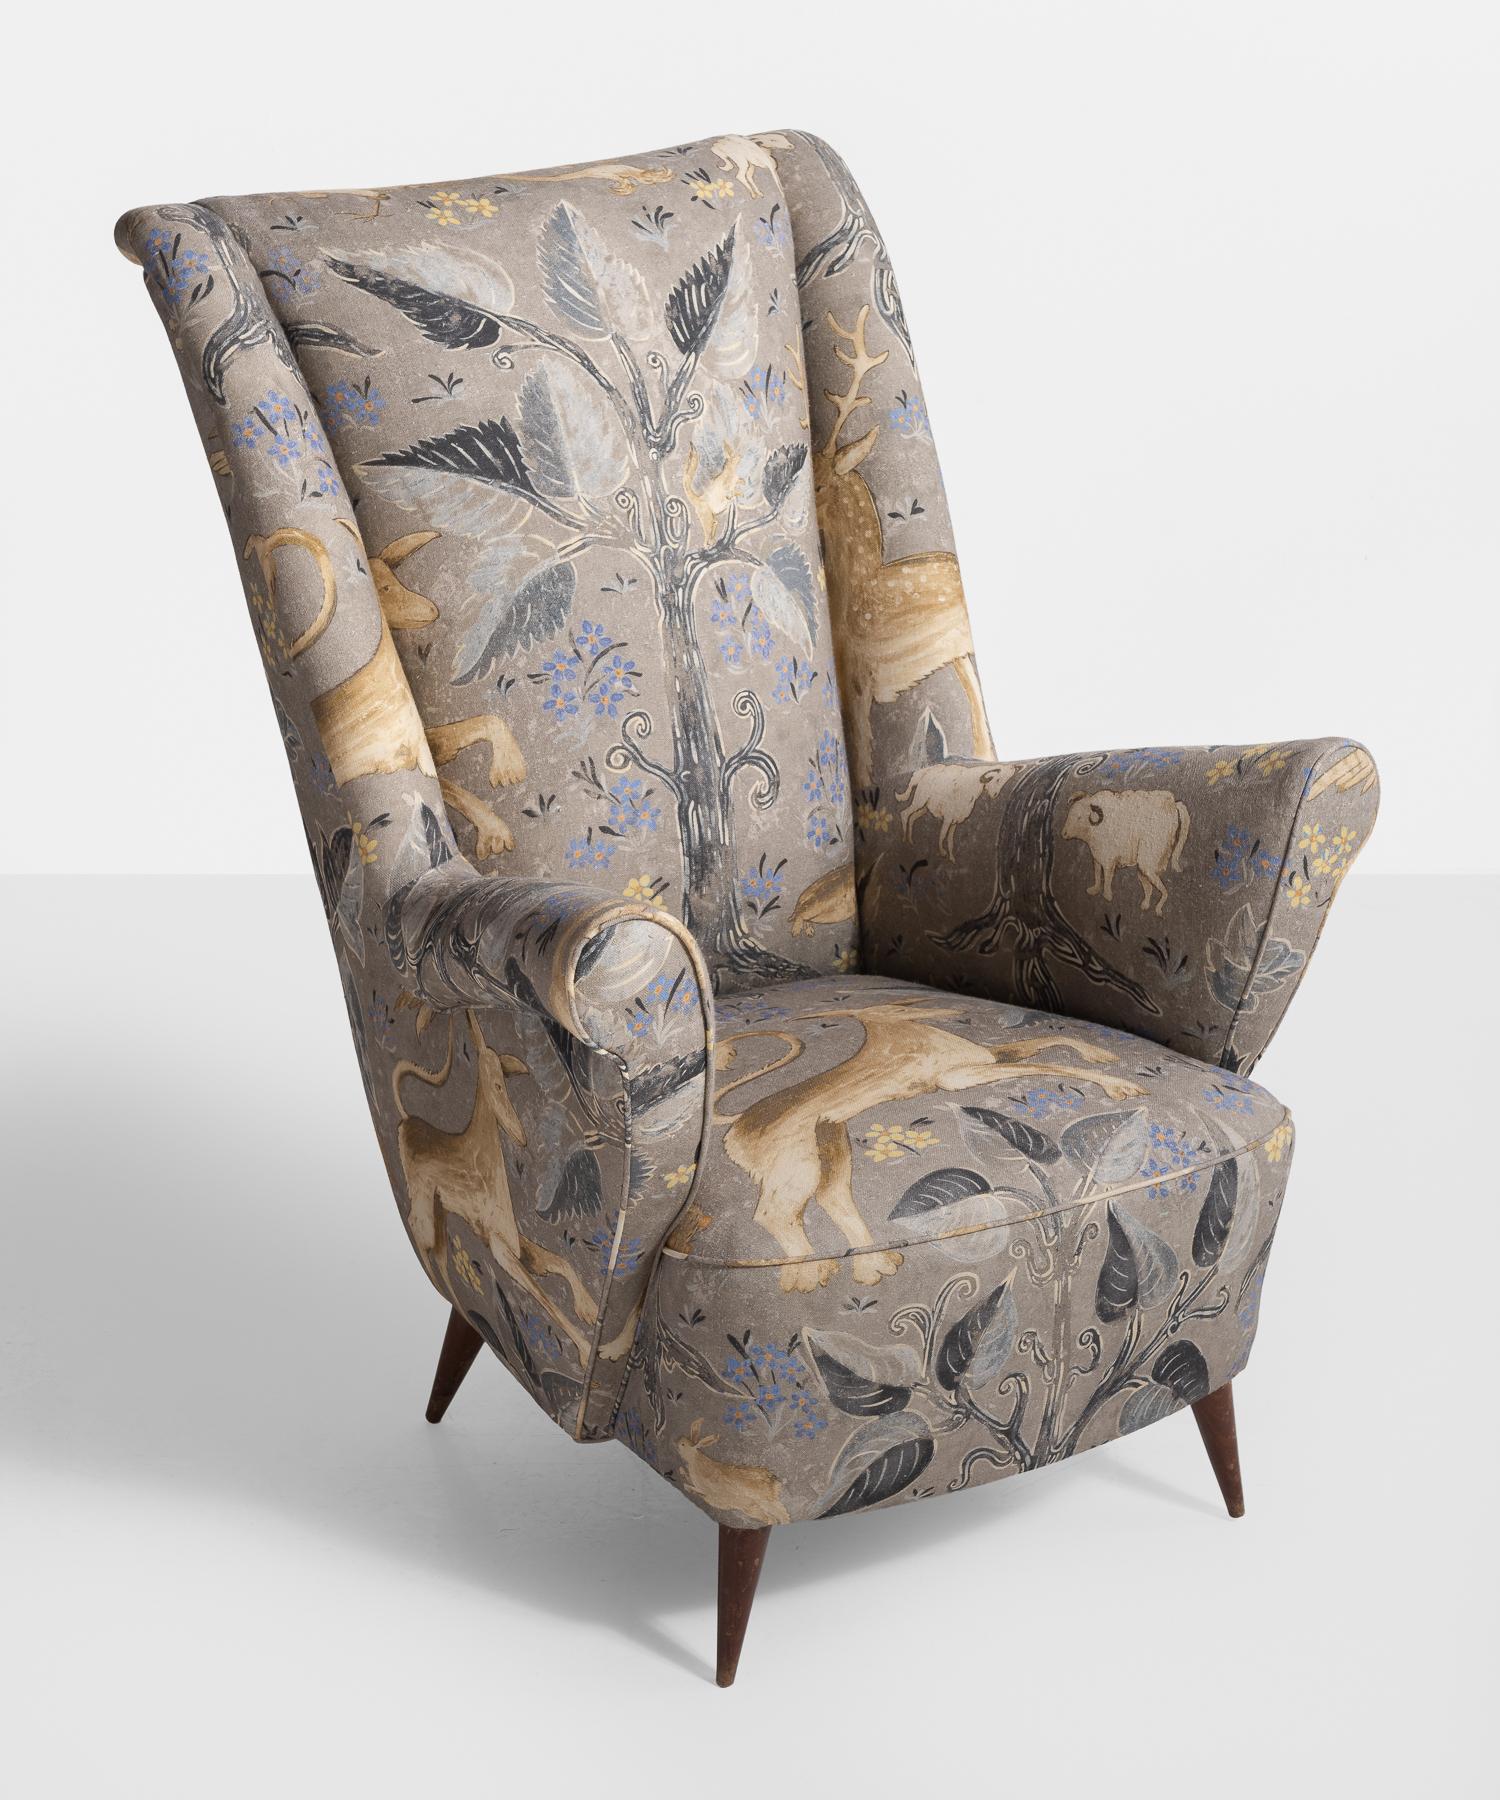 Arredamenti ISA Linen Armchair, Italy, circa 1950

Wonderful form, newly upholstered in pewter grey arden linen by Zoffany.